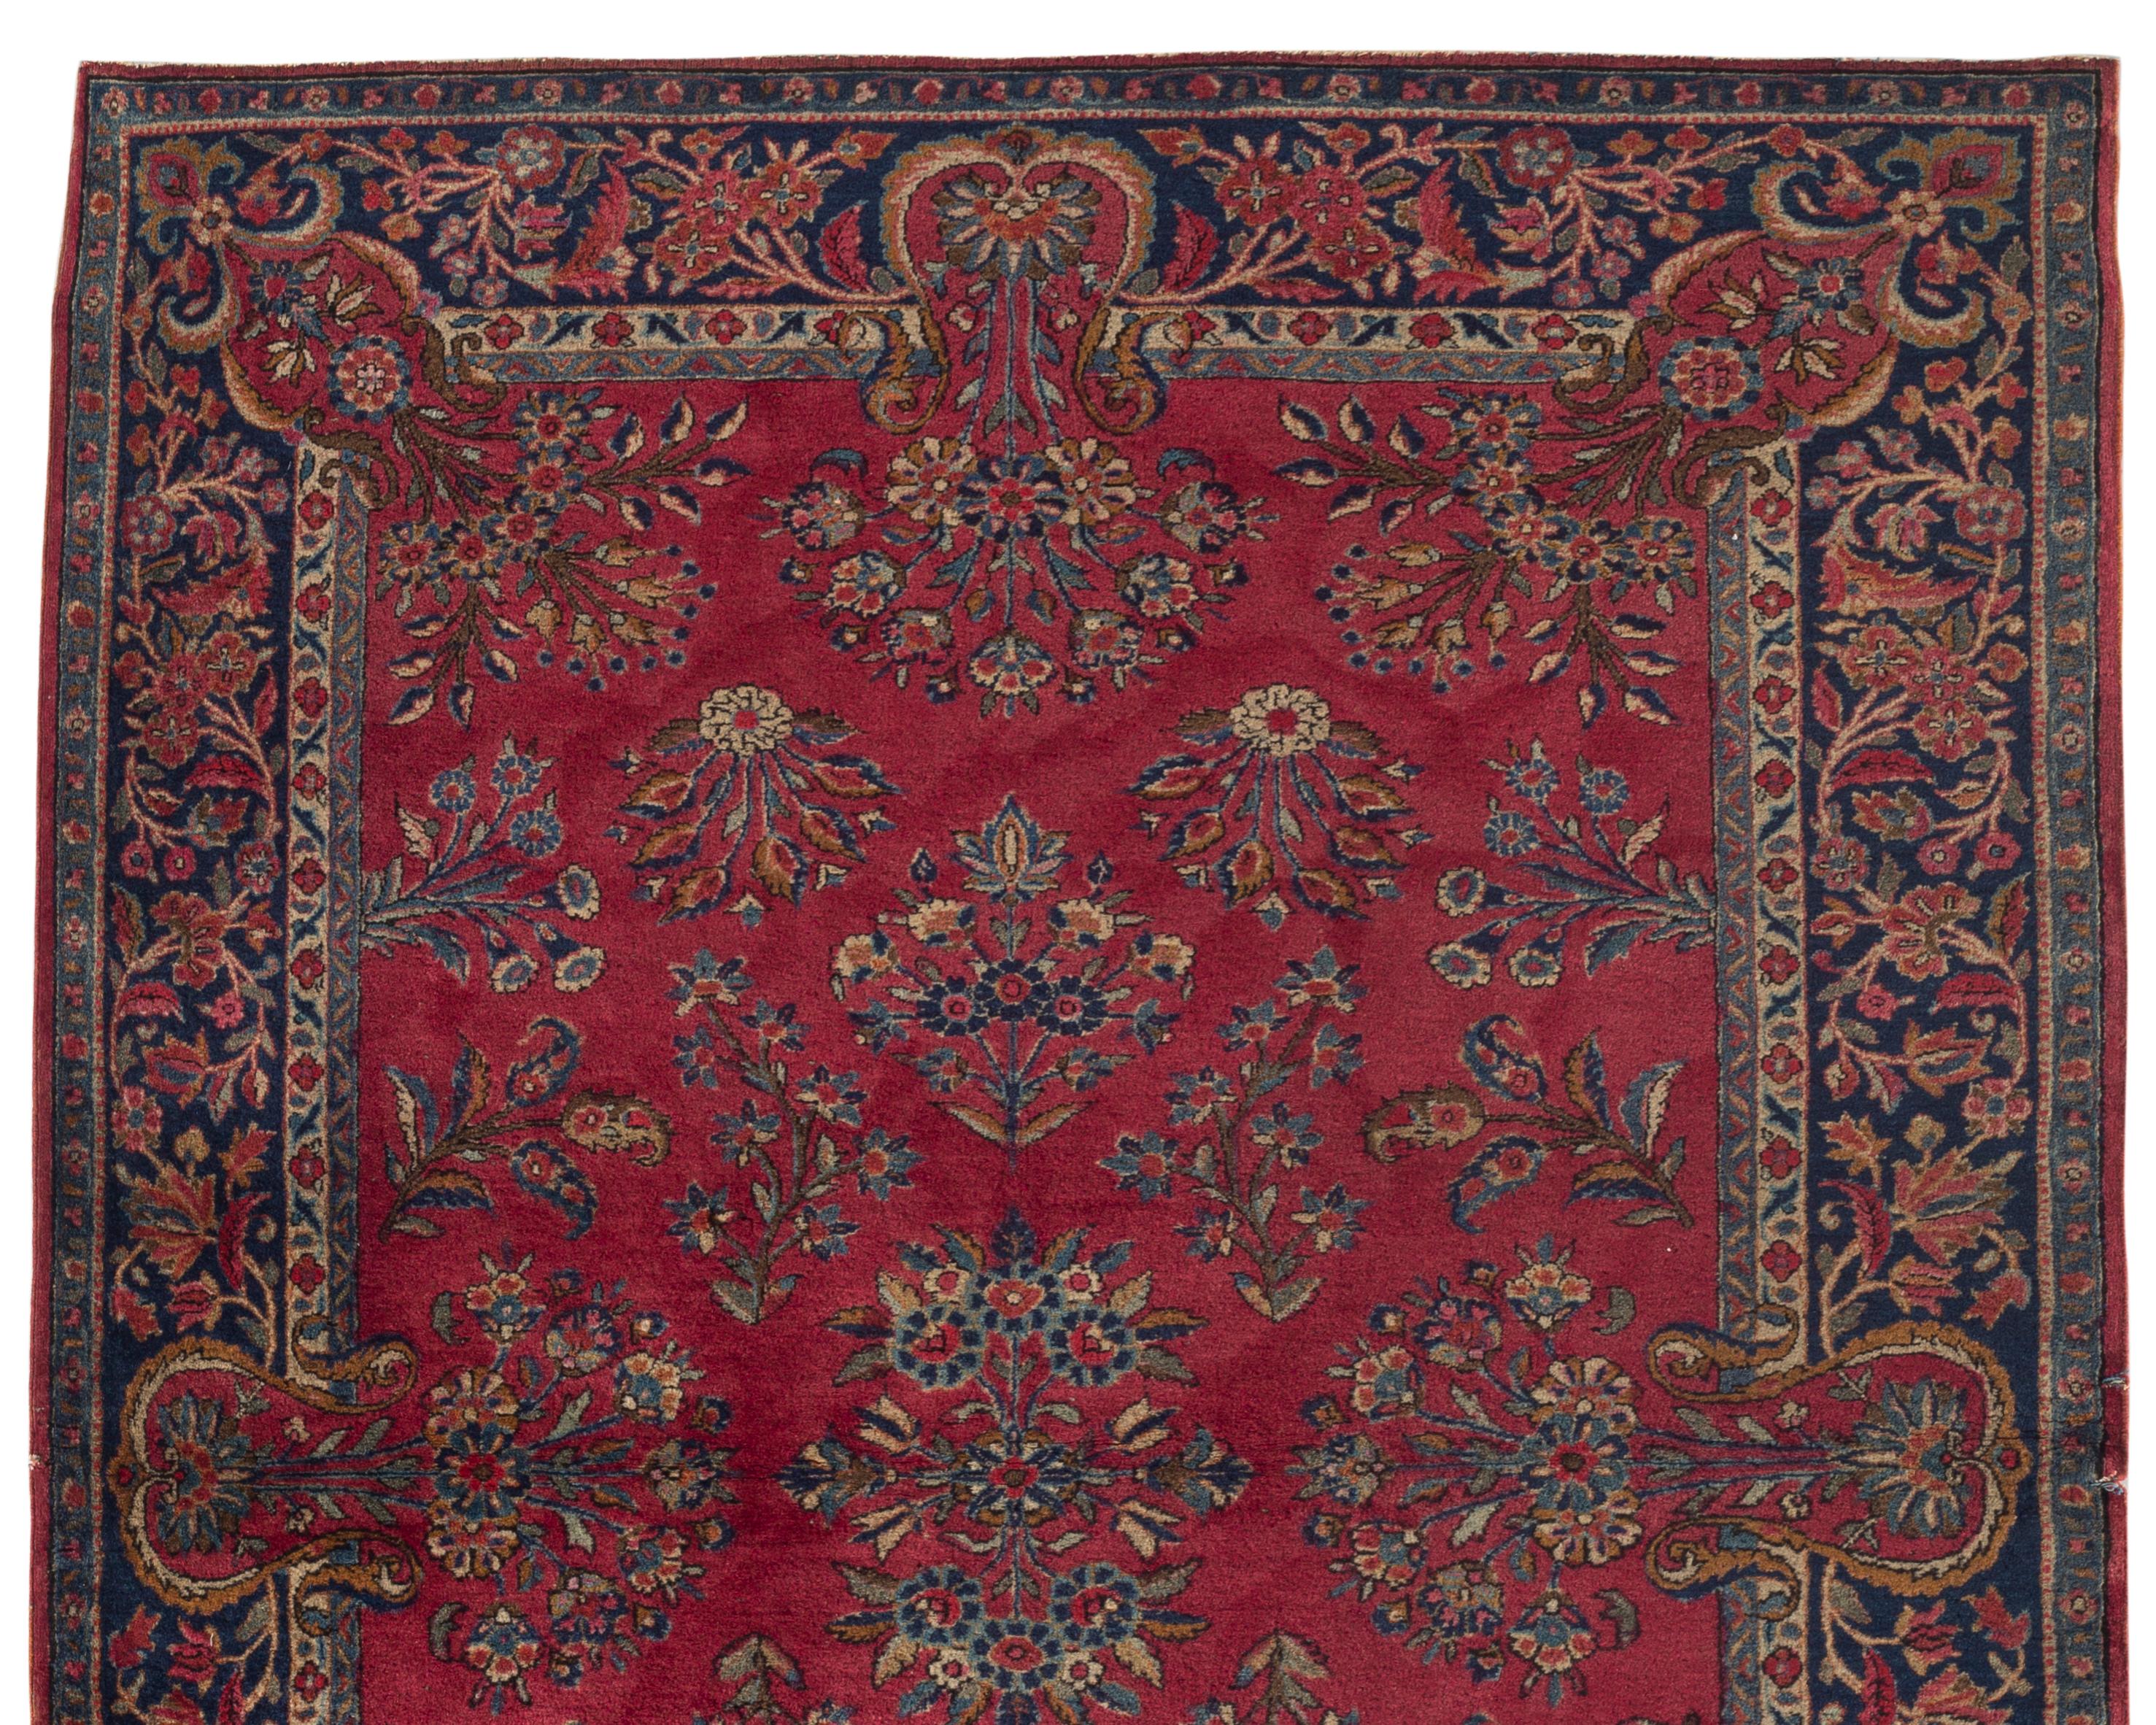 Antique Persian Manchester Kashan, circa 1900. The wonderful red field with bold floral motifs surrounded by a navy border gives this rug a look and feel of quality and importance. The term Manchester signifies that the wool used is very special, it